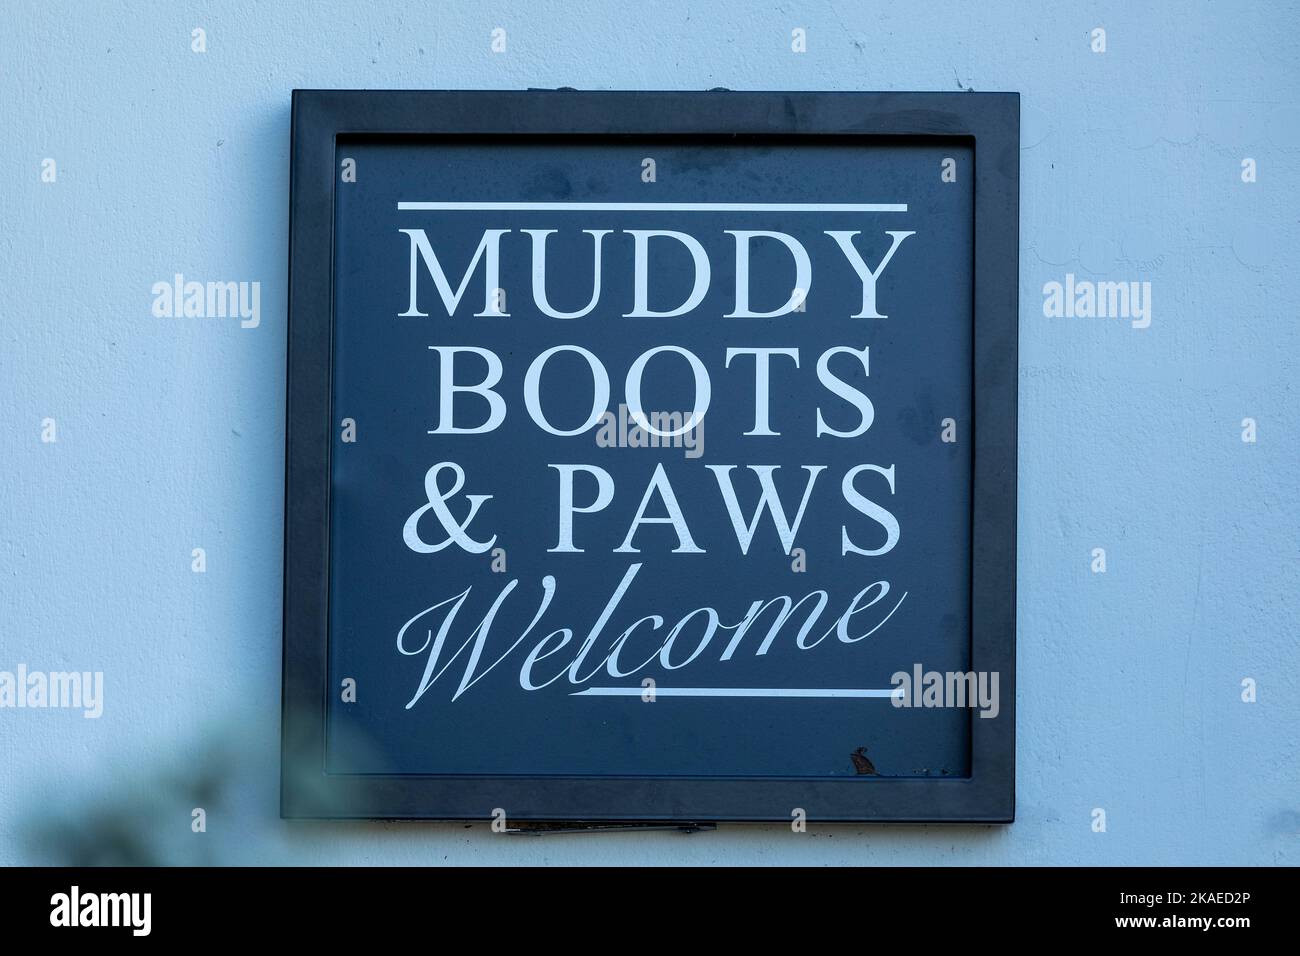 Sign inviting muddy boots and paws, Cuckmere Inn, Seven Sisters, South Downs, England, Great Britain Stock Photo